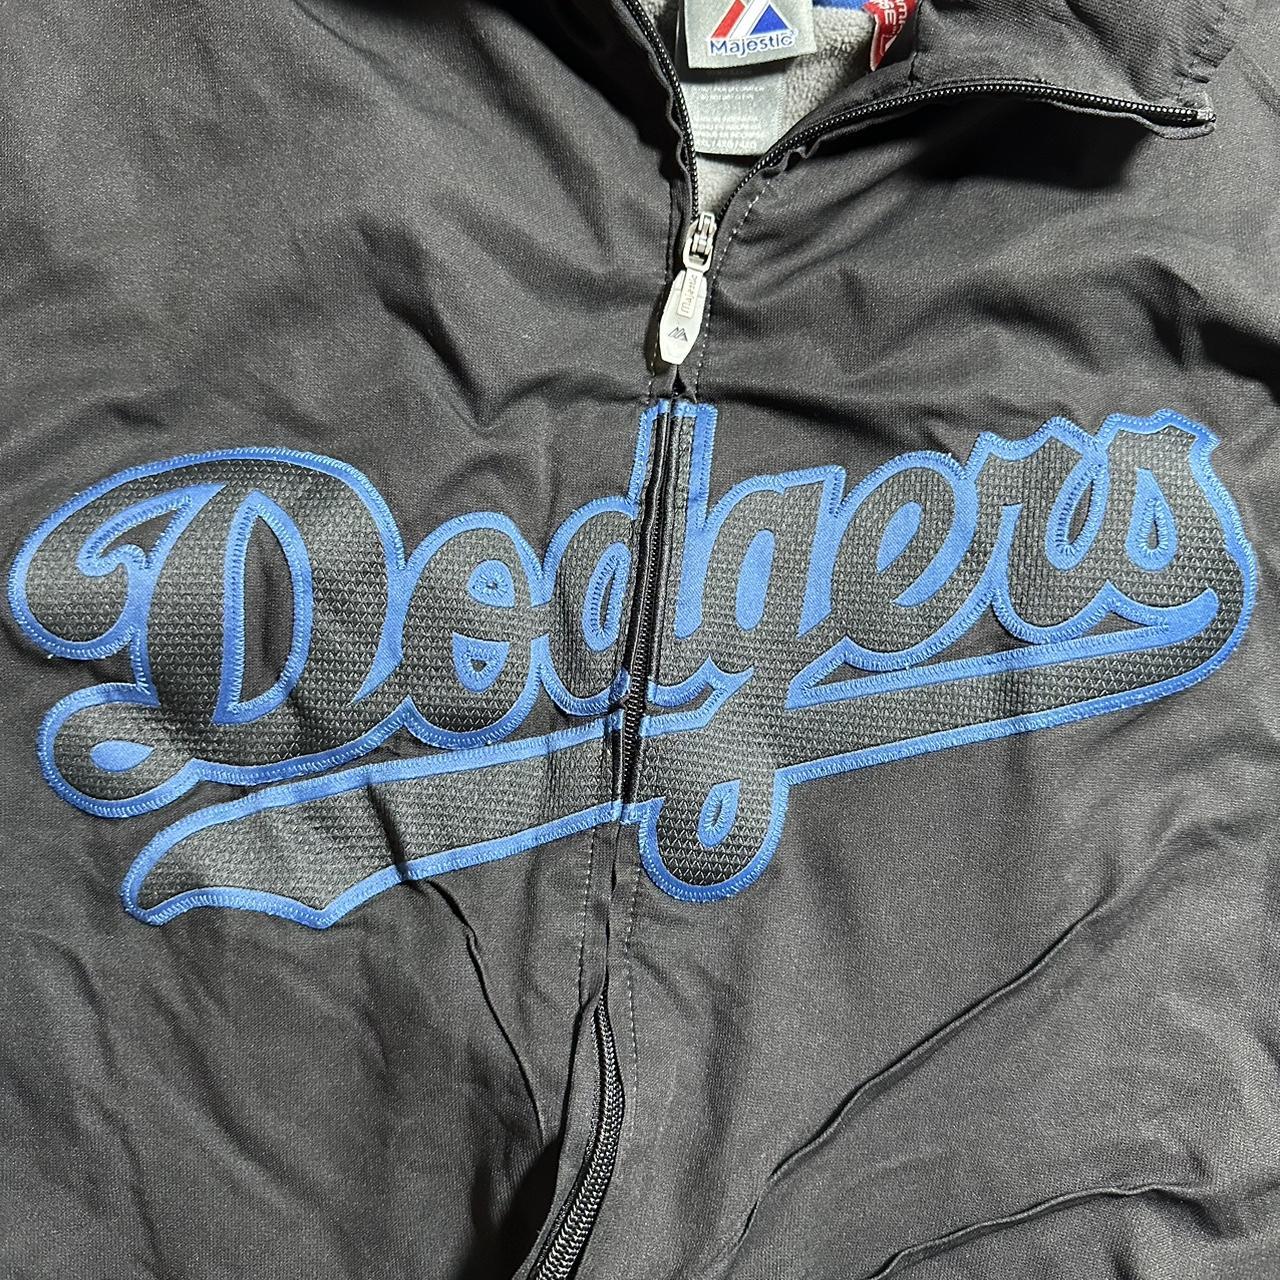 Los Angeles Dodgers jacket, perfect for any MLB fan. - Depop